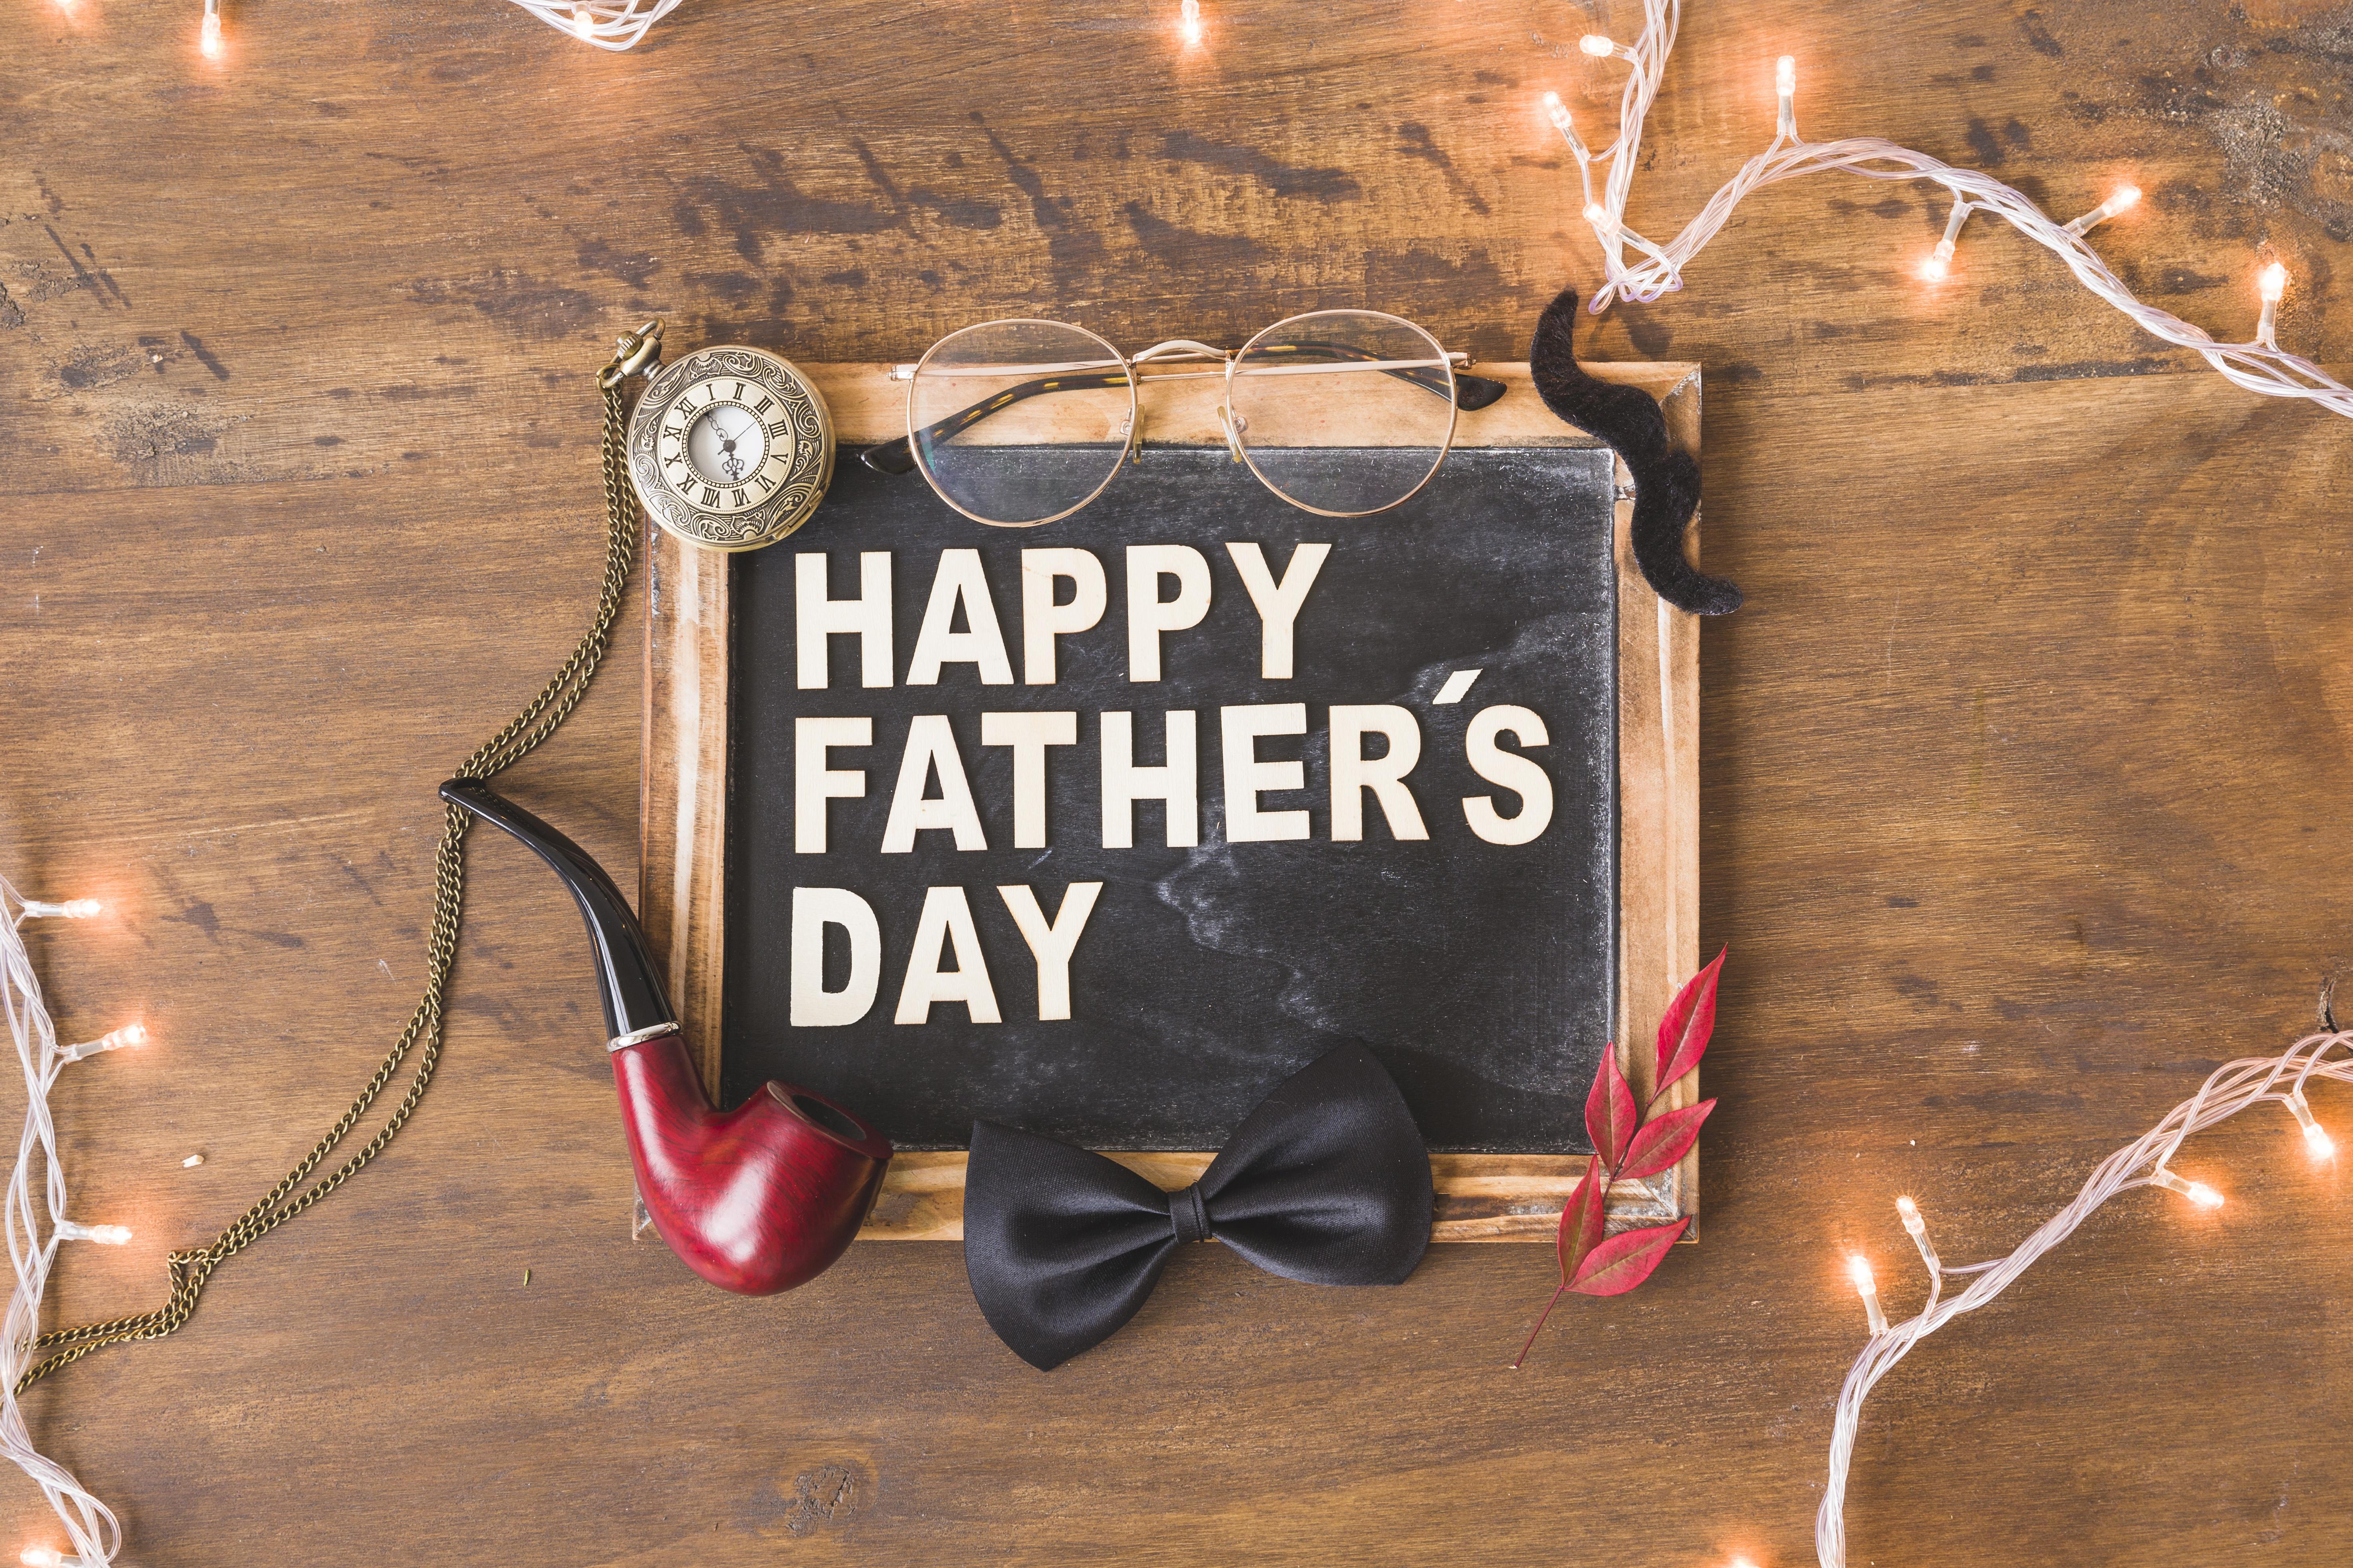 4k Father S Day Wallpaper Background Image